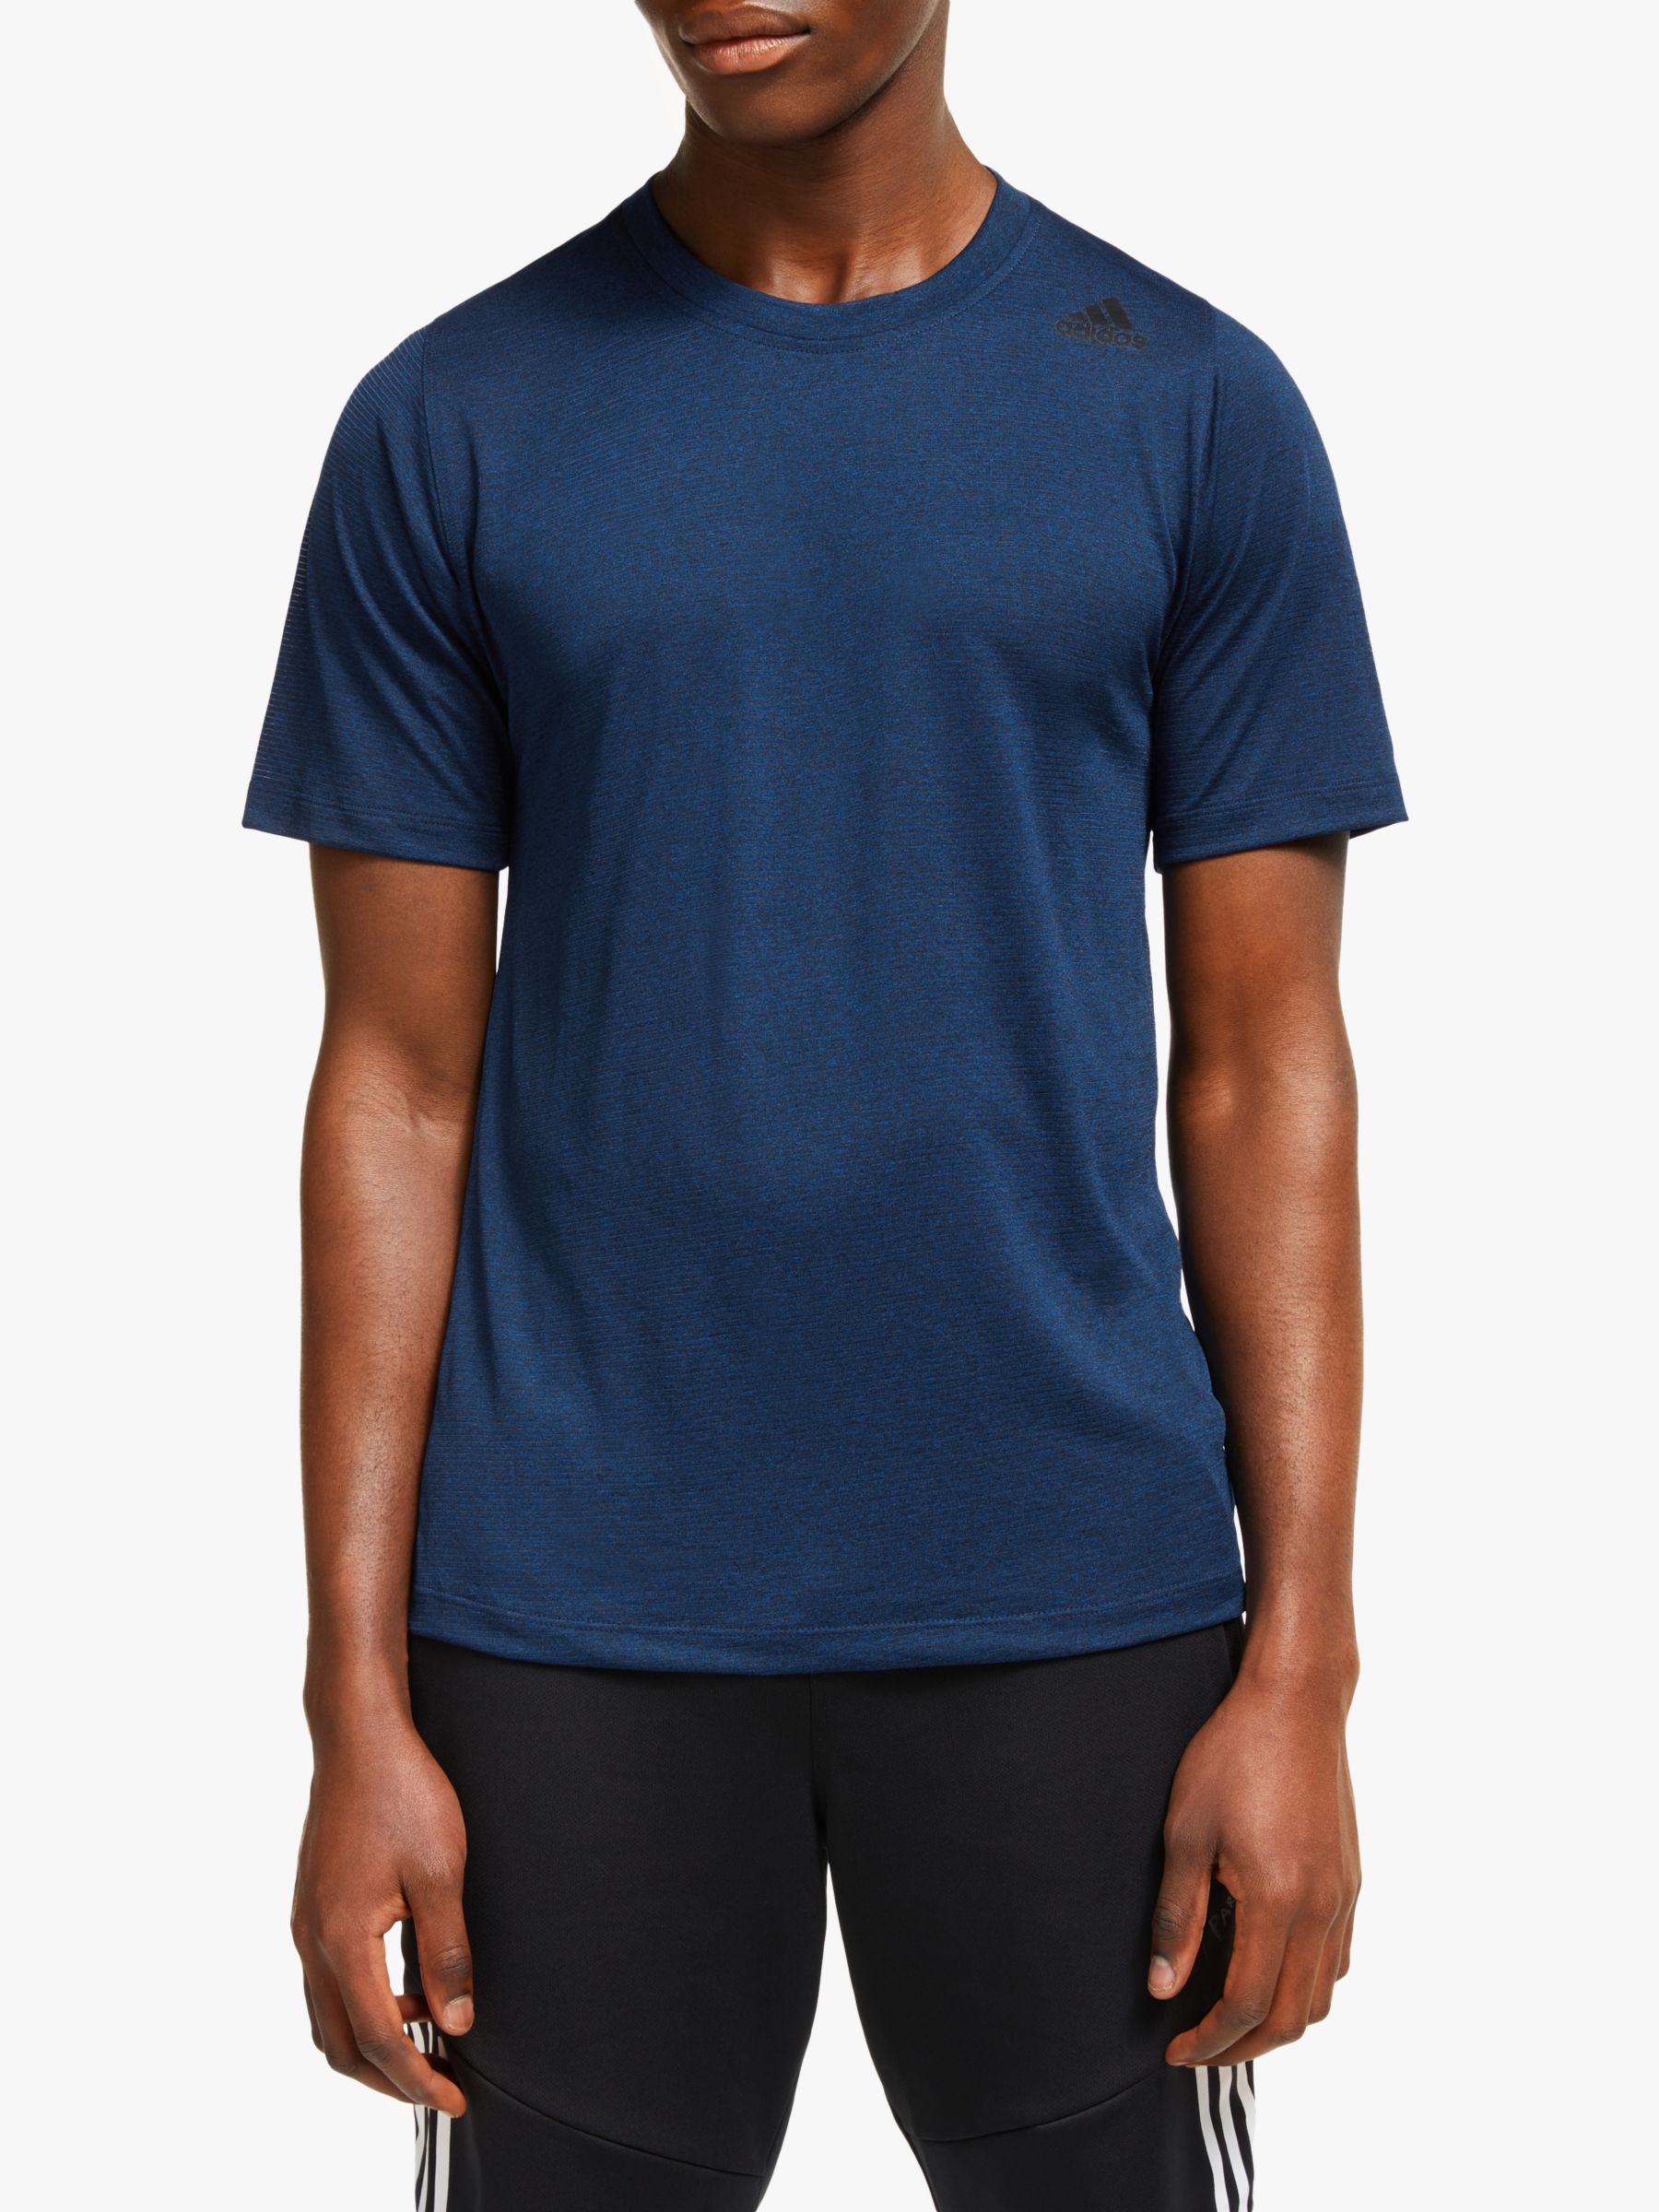 adidas FreeLift Tech Climacool Fitted Training T-Shirt